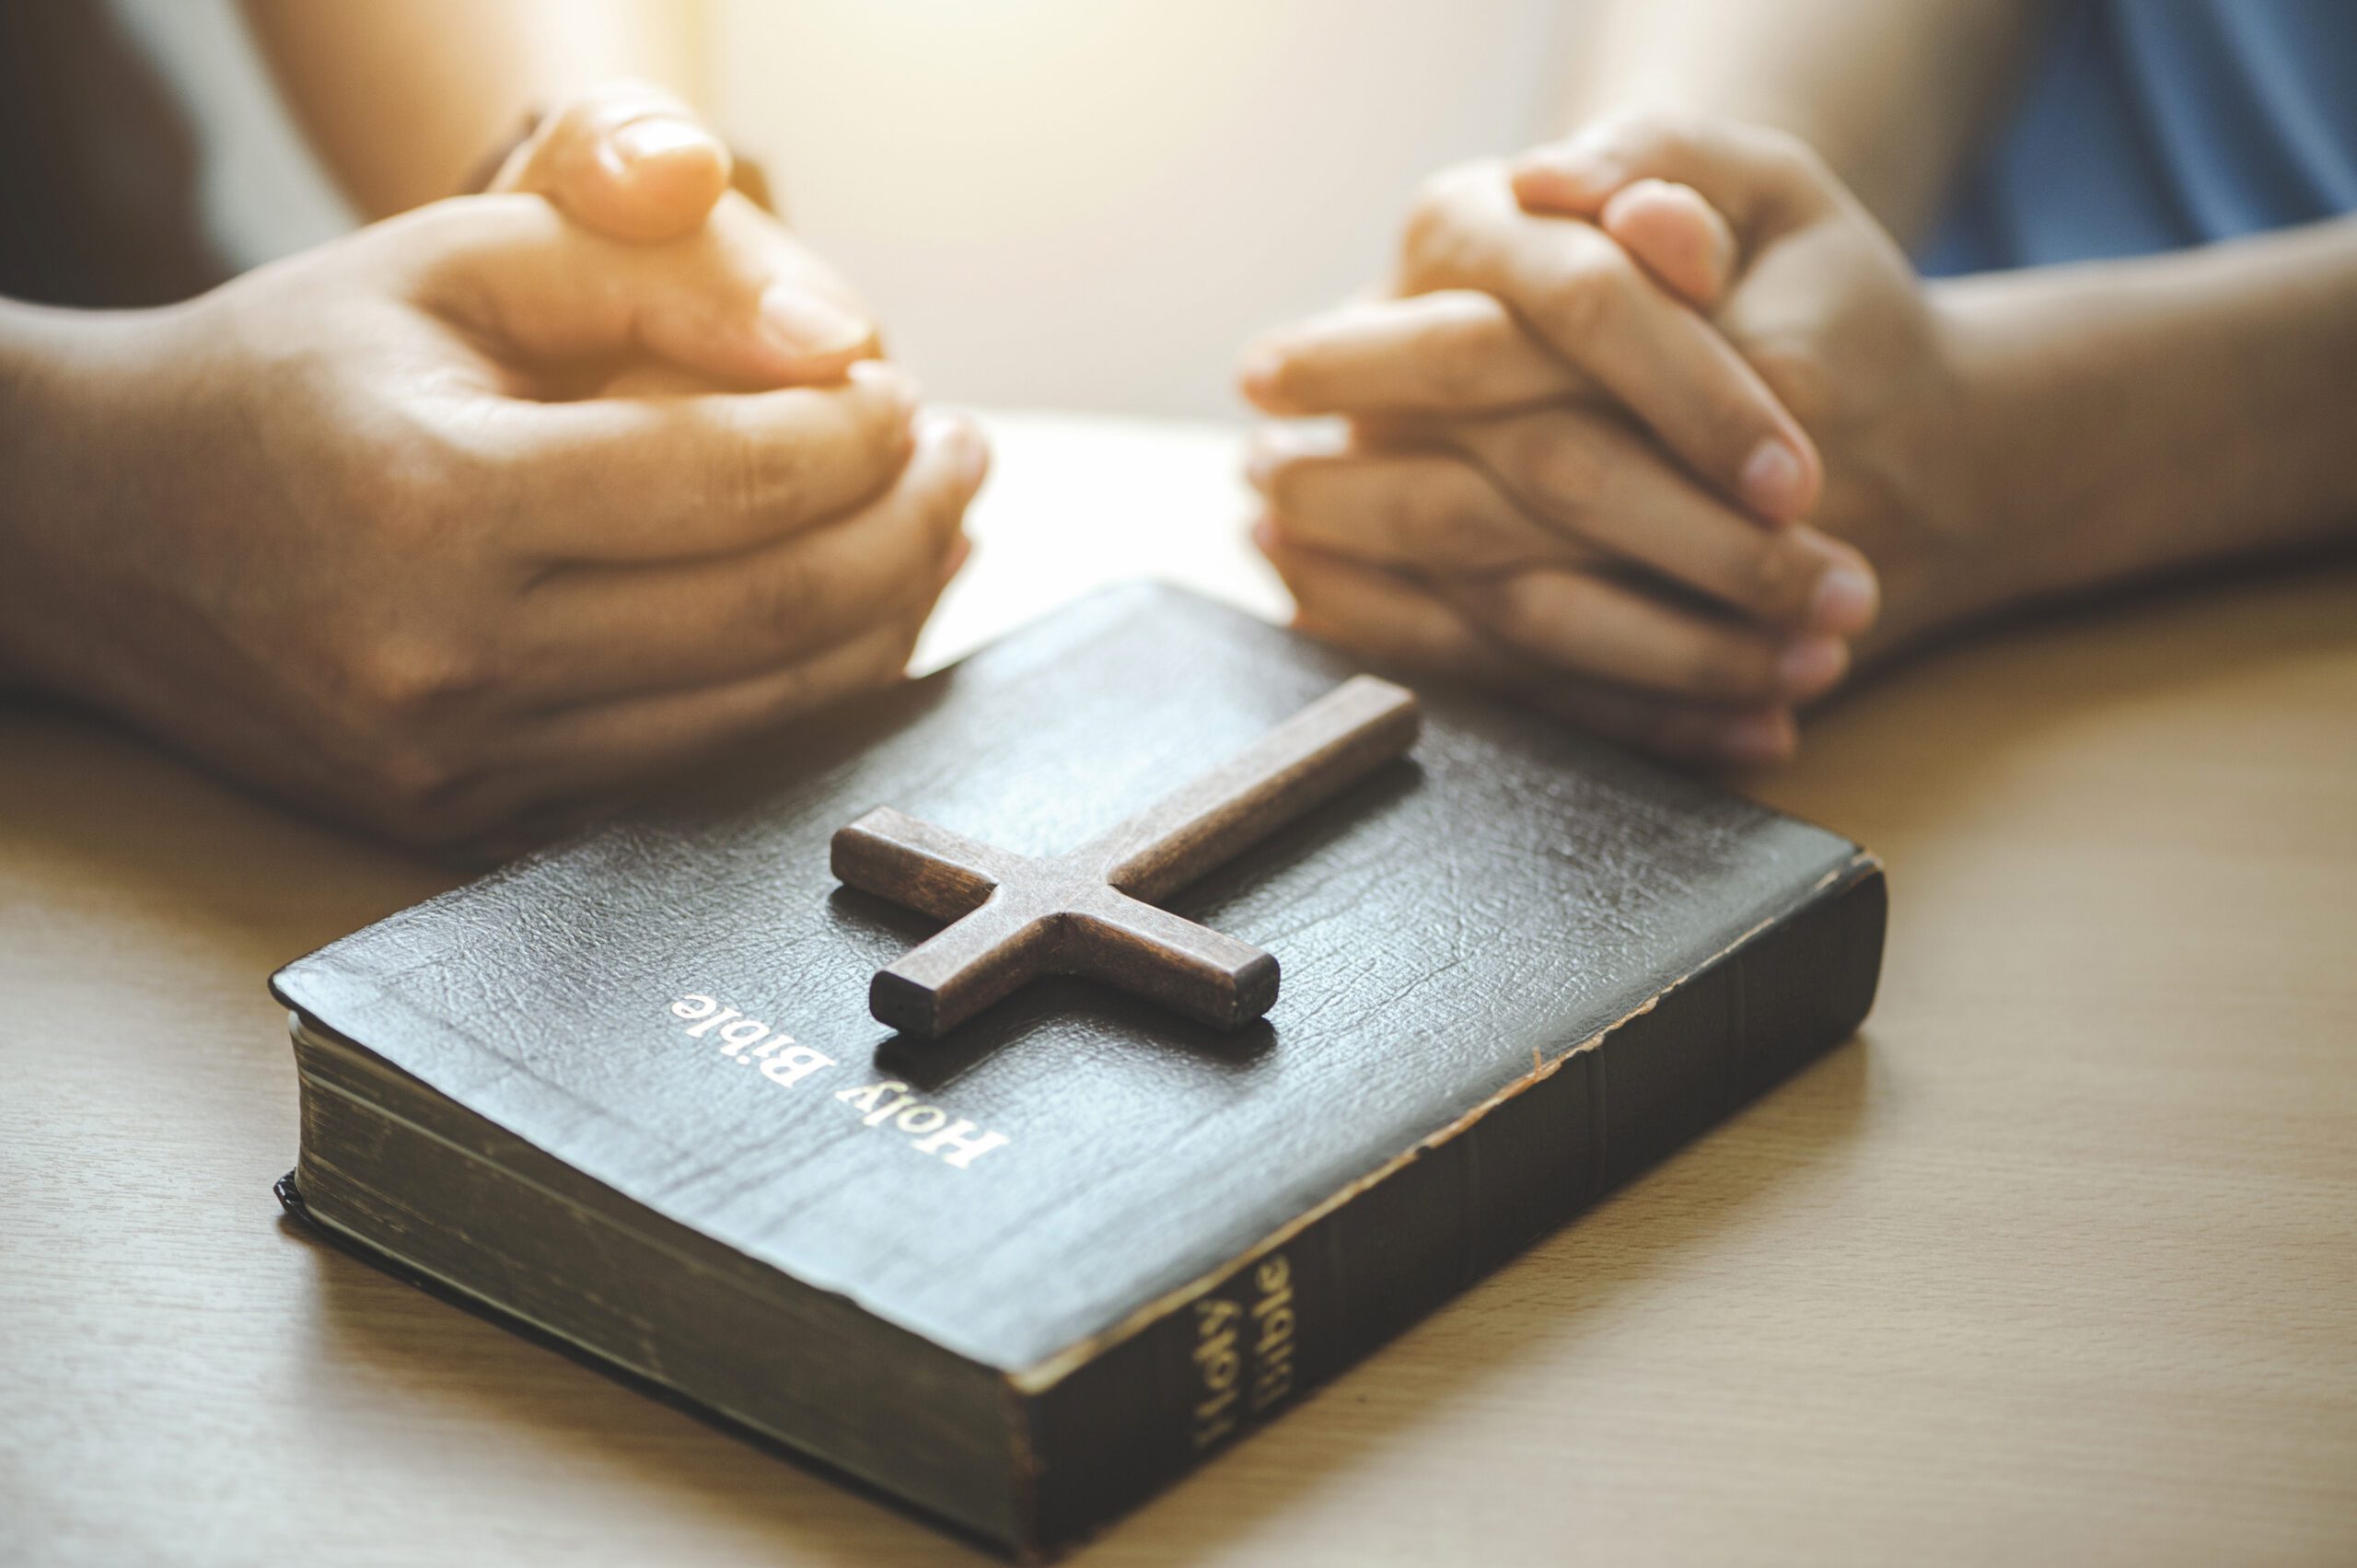 Hands of Christian group Pray for god blessing with the bible on a wooden table. begging for forgiveness and believe in goodness. Christian life crisis prayer and worship to god.